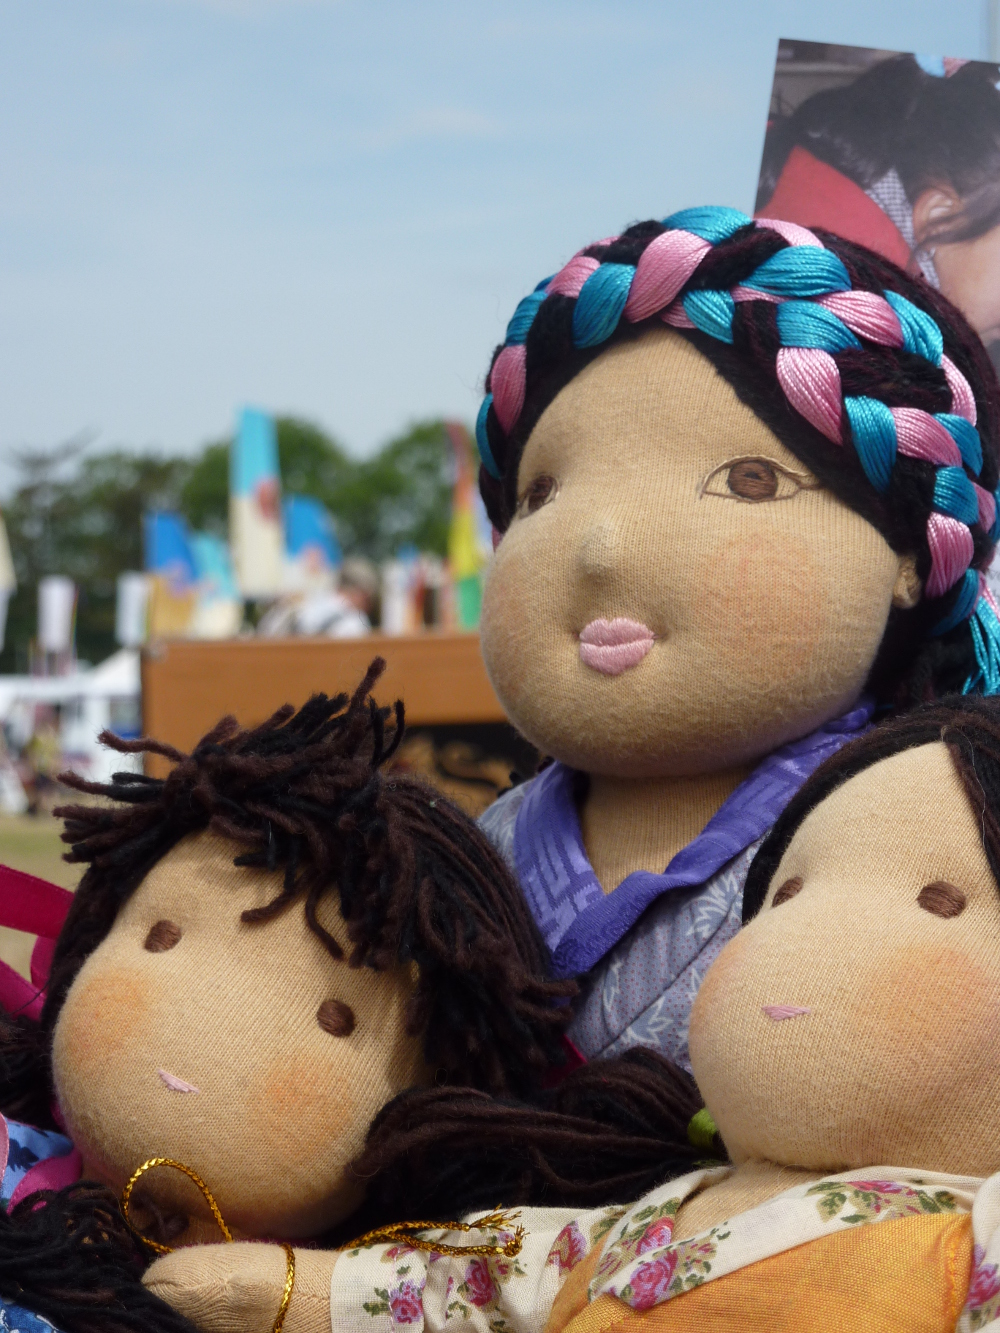 Dolls4Tibet, supported by the Tibet Relief Fund